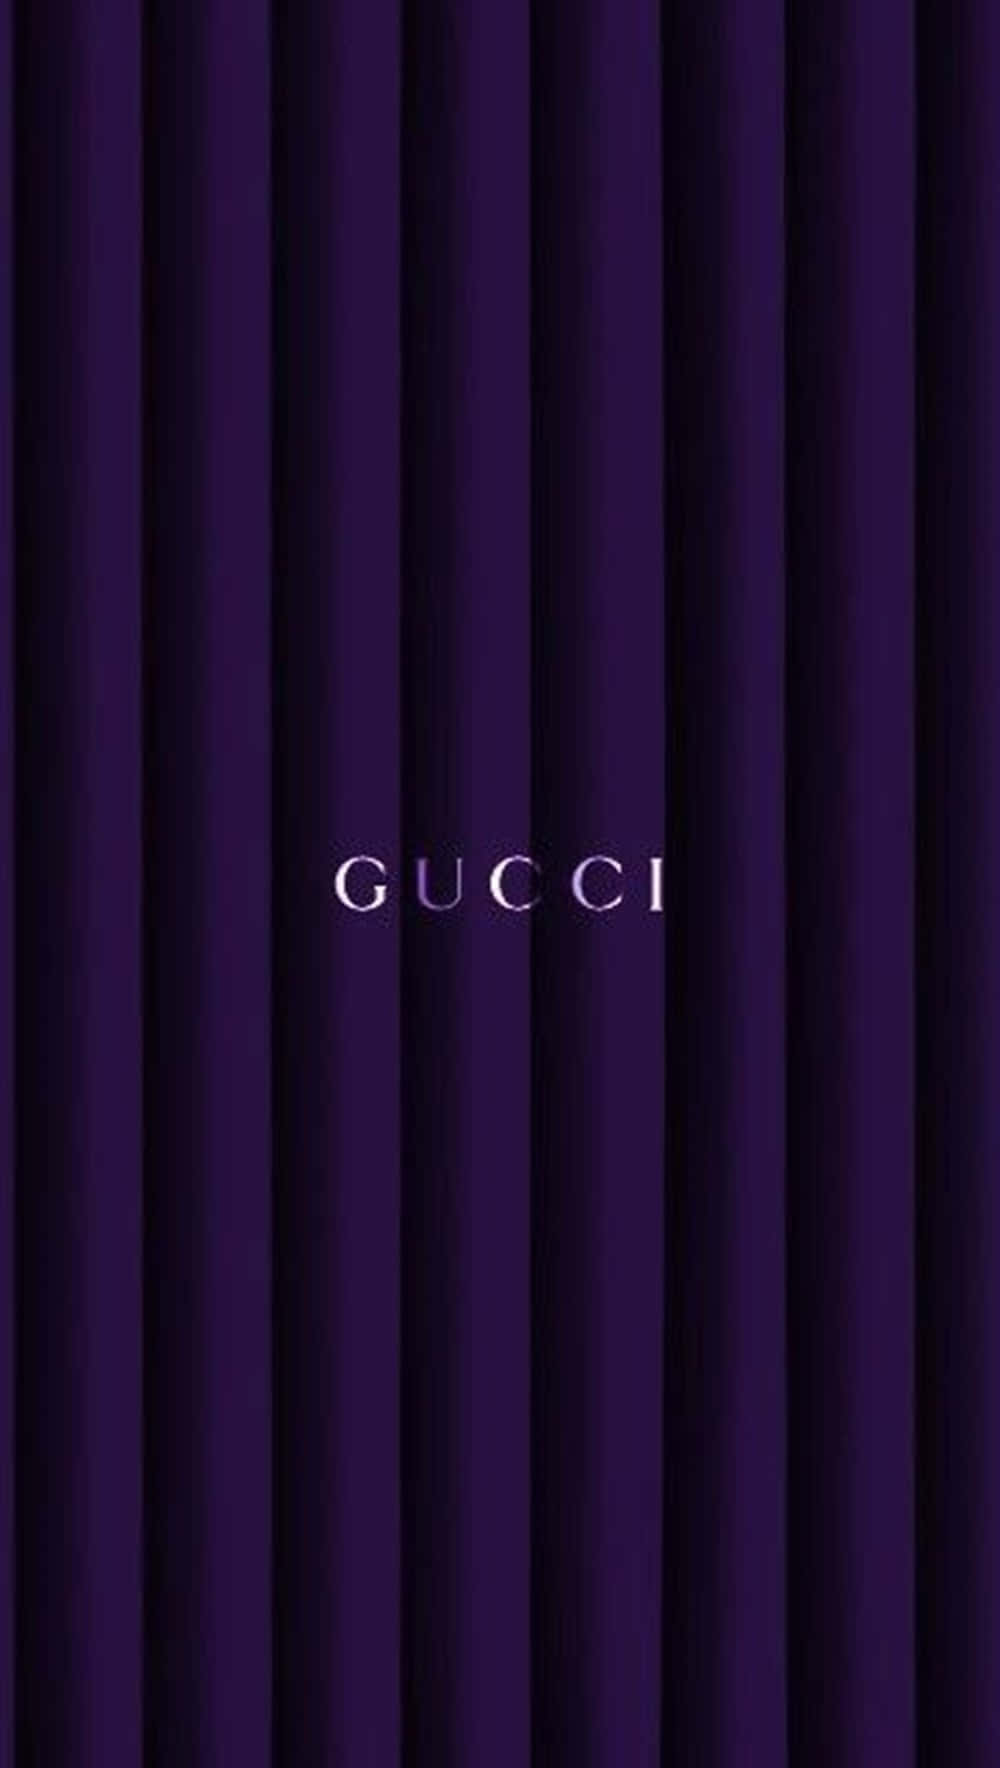 Show off your style in Purple Gucci Wallpaper